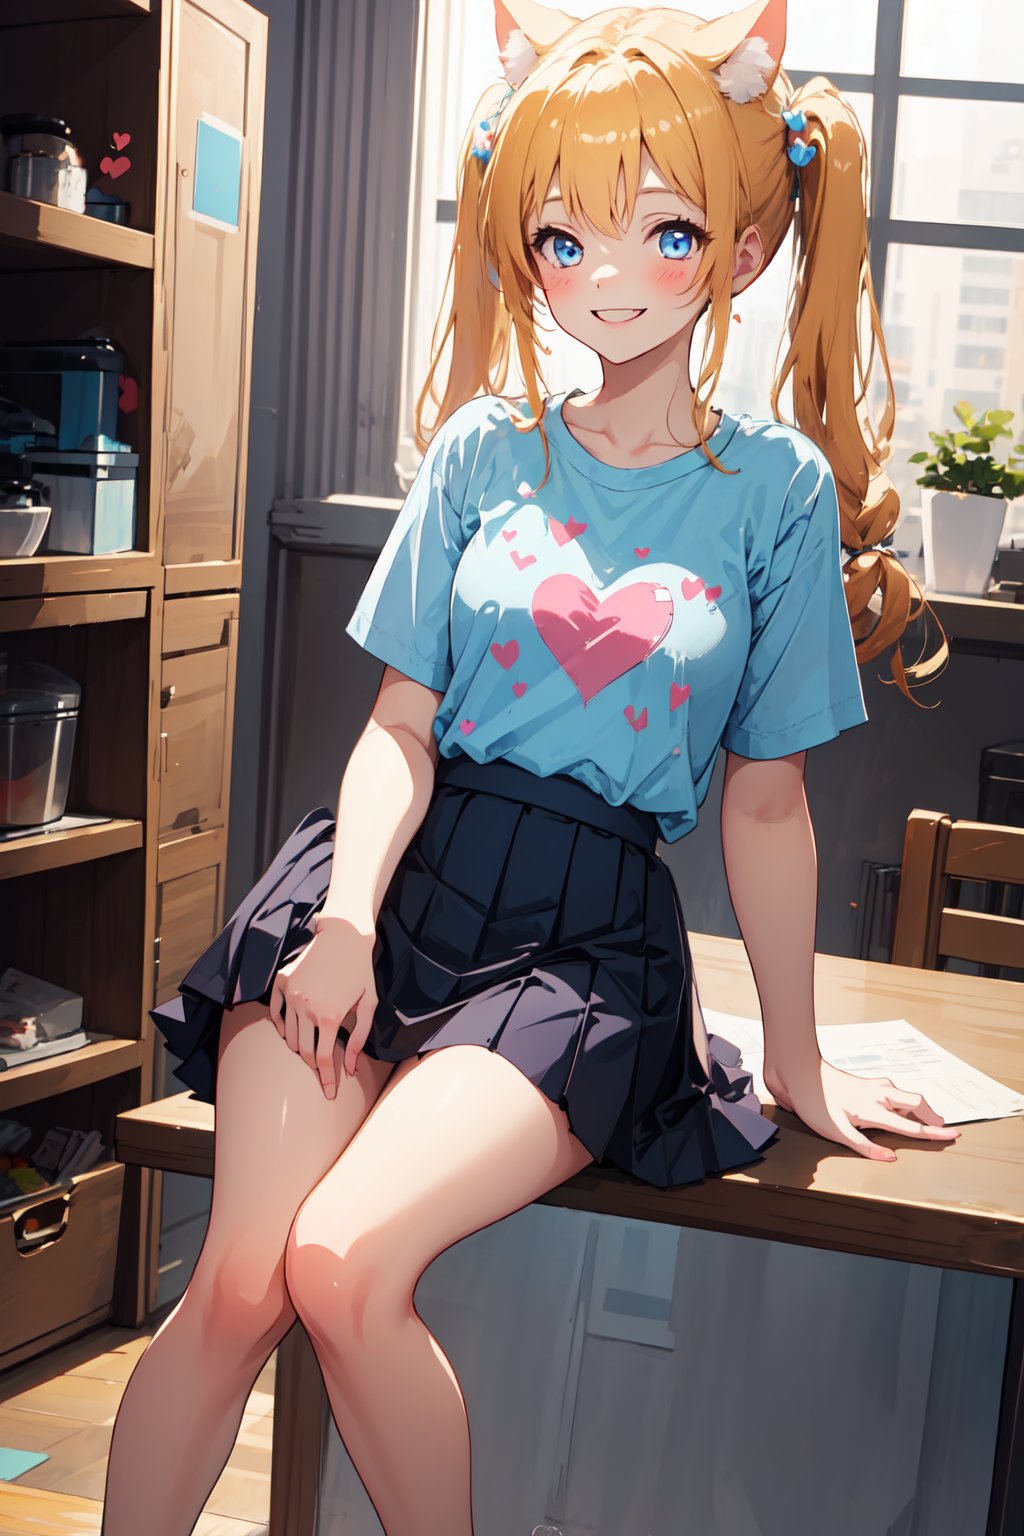 1girl, cute cat girl, room in background. she wears a light blue outfit (shirt, skirt), long blonde hair. little body, full body character. masterpiece. she is happy, smiling. twintails hairstyle, masterpiece, hearts on the sides. cat ears. looking at viewer, sitting over a table, Detailed